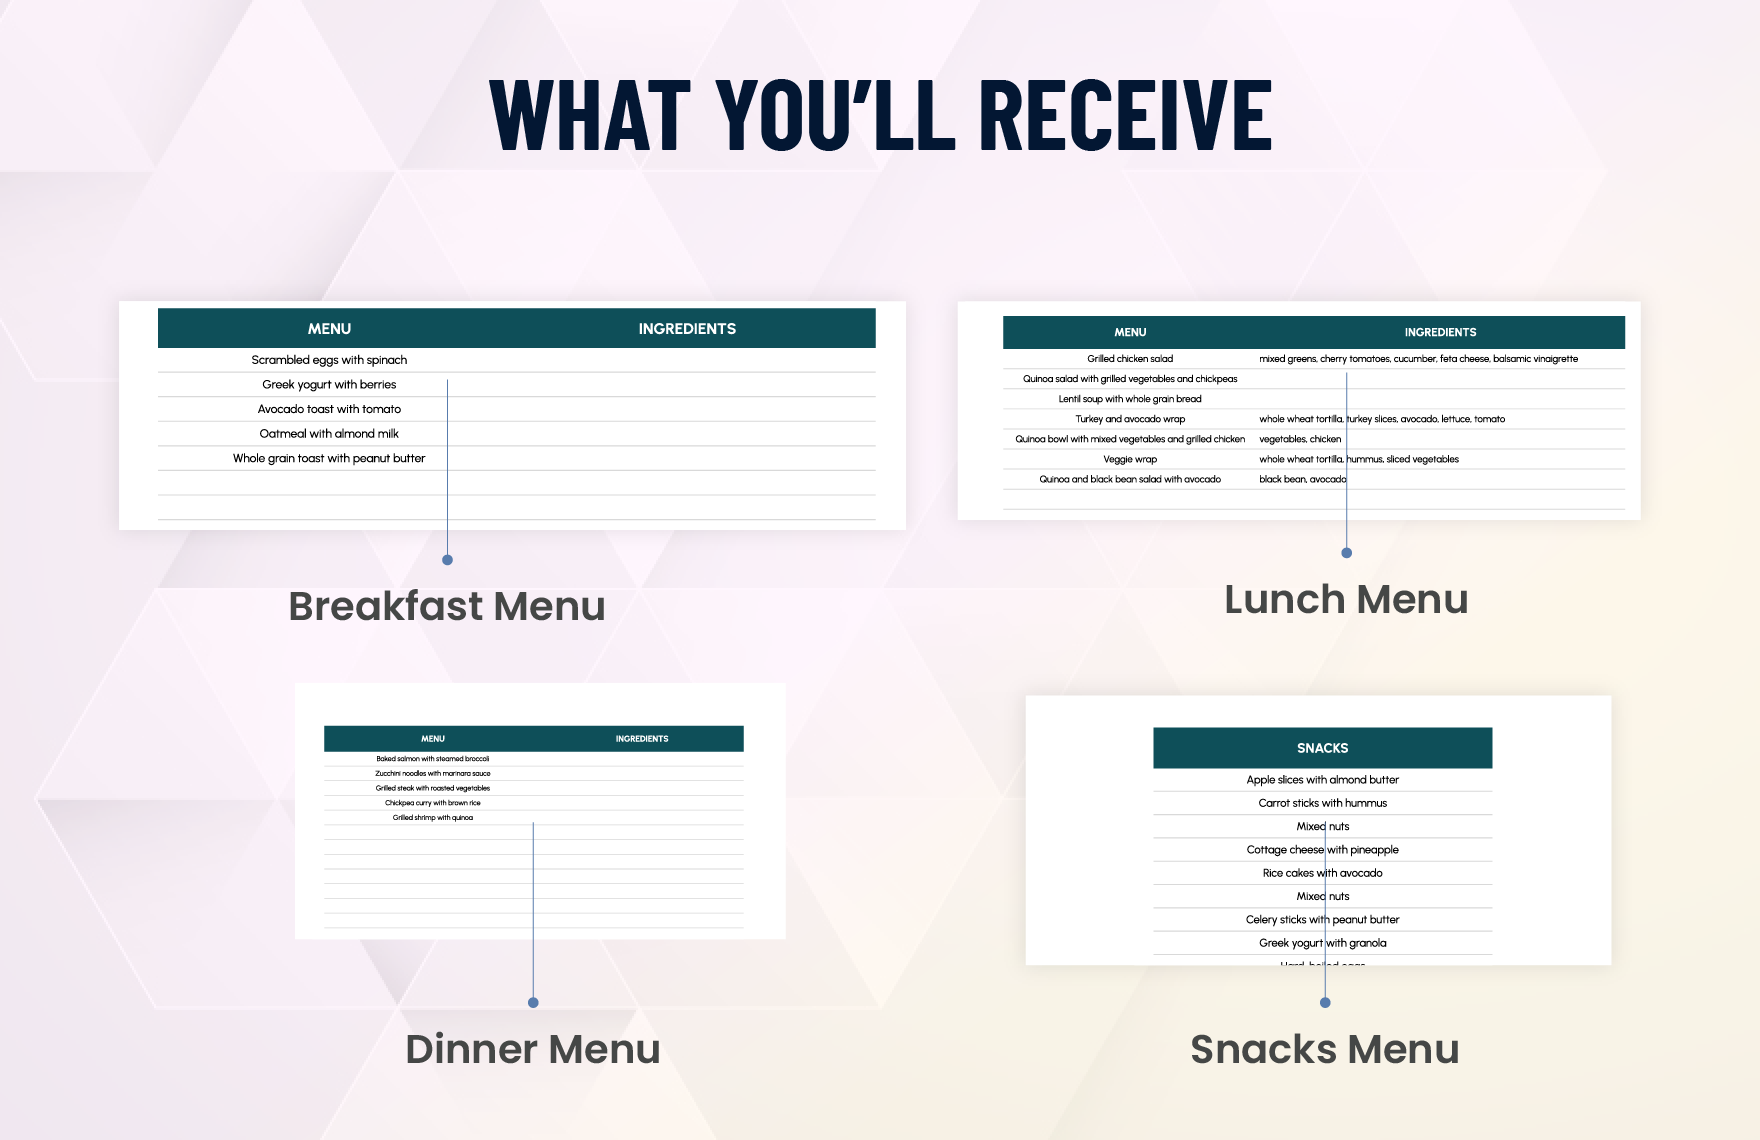 Weight Loss Meal Plan Template